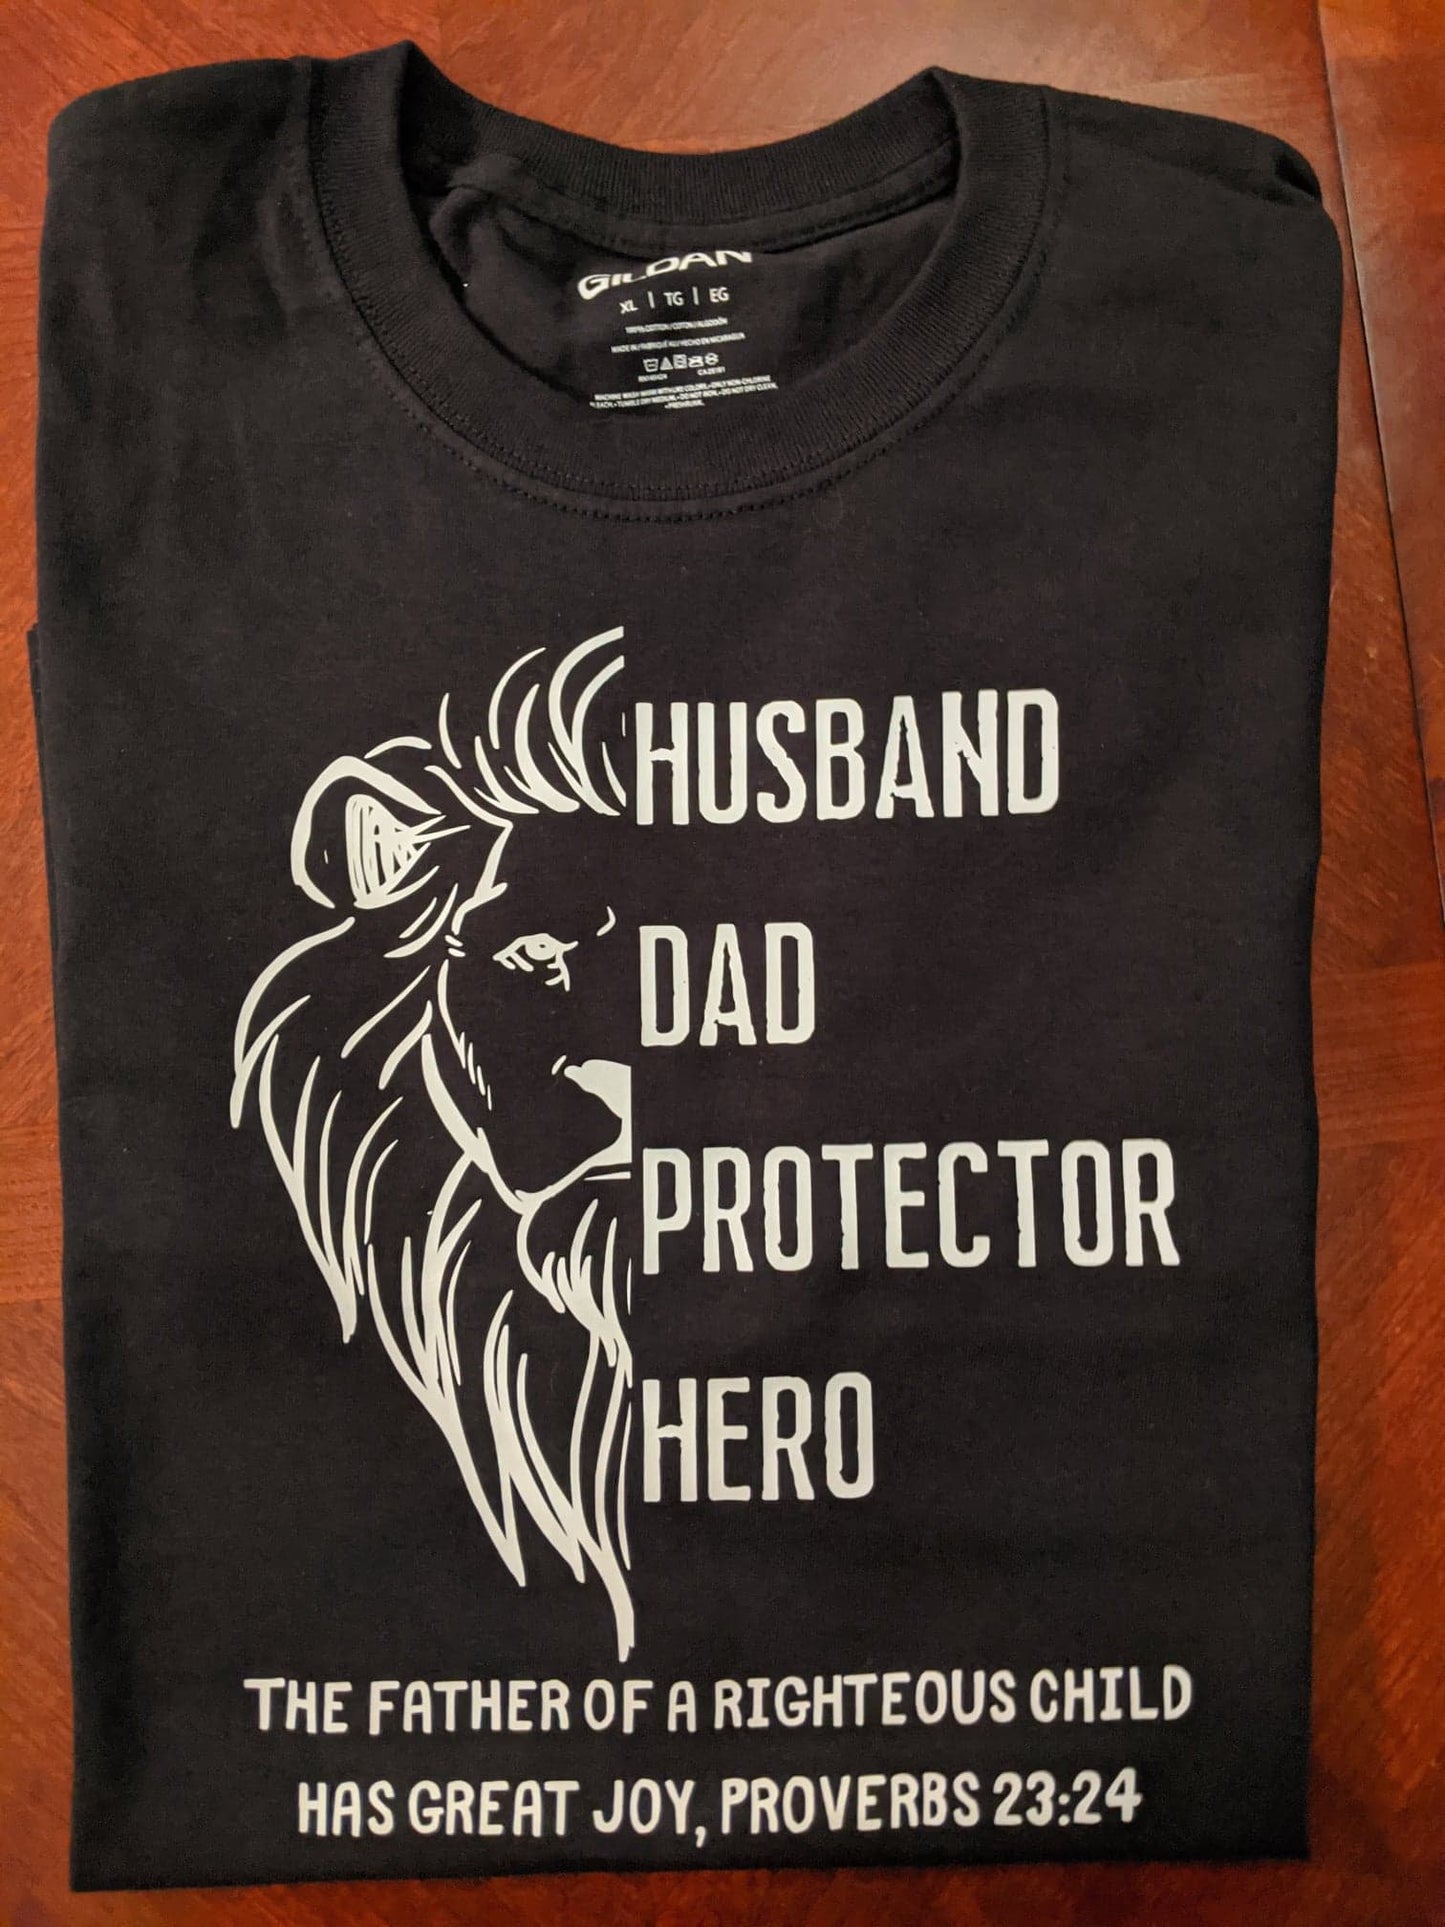 Husband Daddy Protector Hero SvG, fathers day, Grandpa SvG, Dad, Papa Svg, Distressed, Cricut, silhouette | PNG, JPEG, SVG instant download